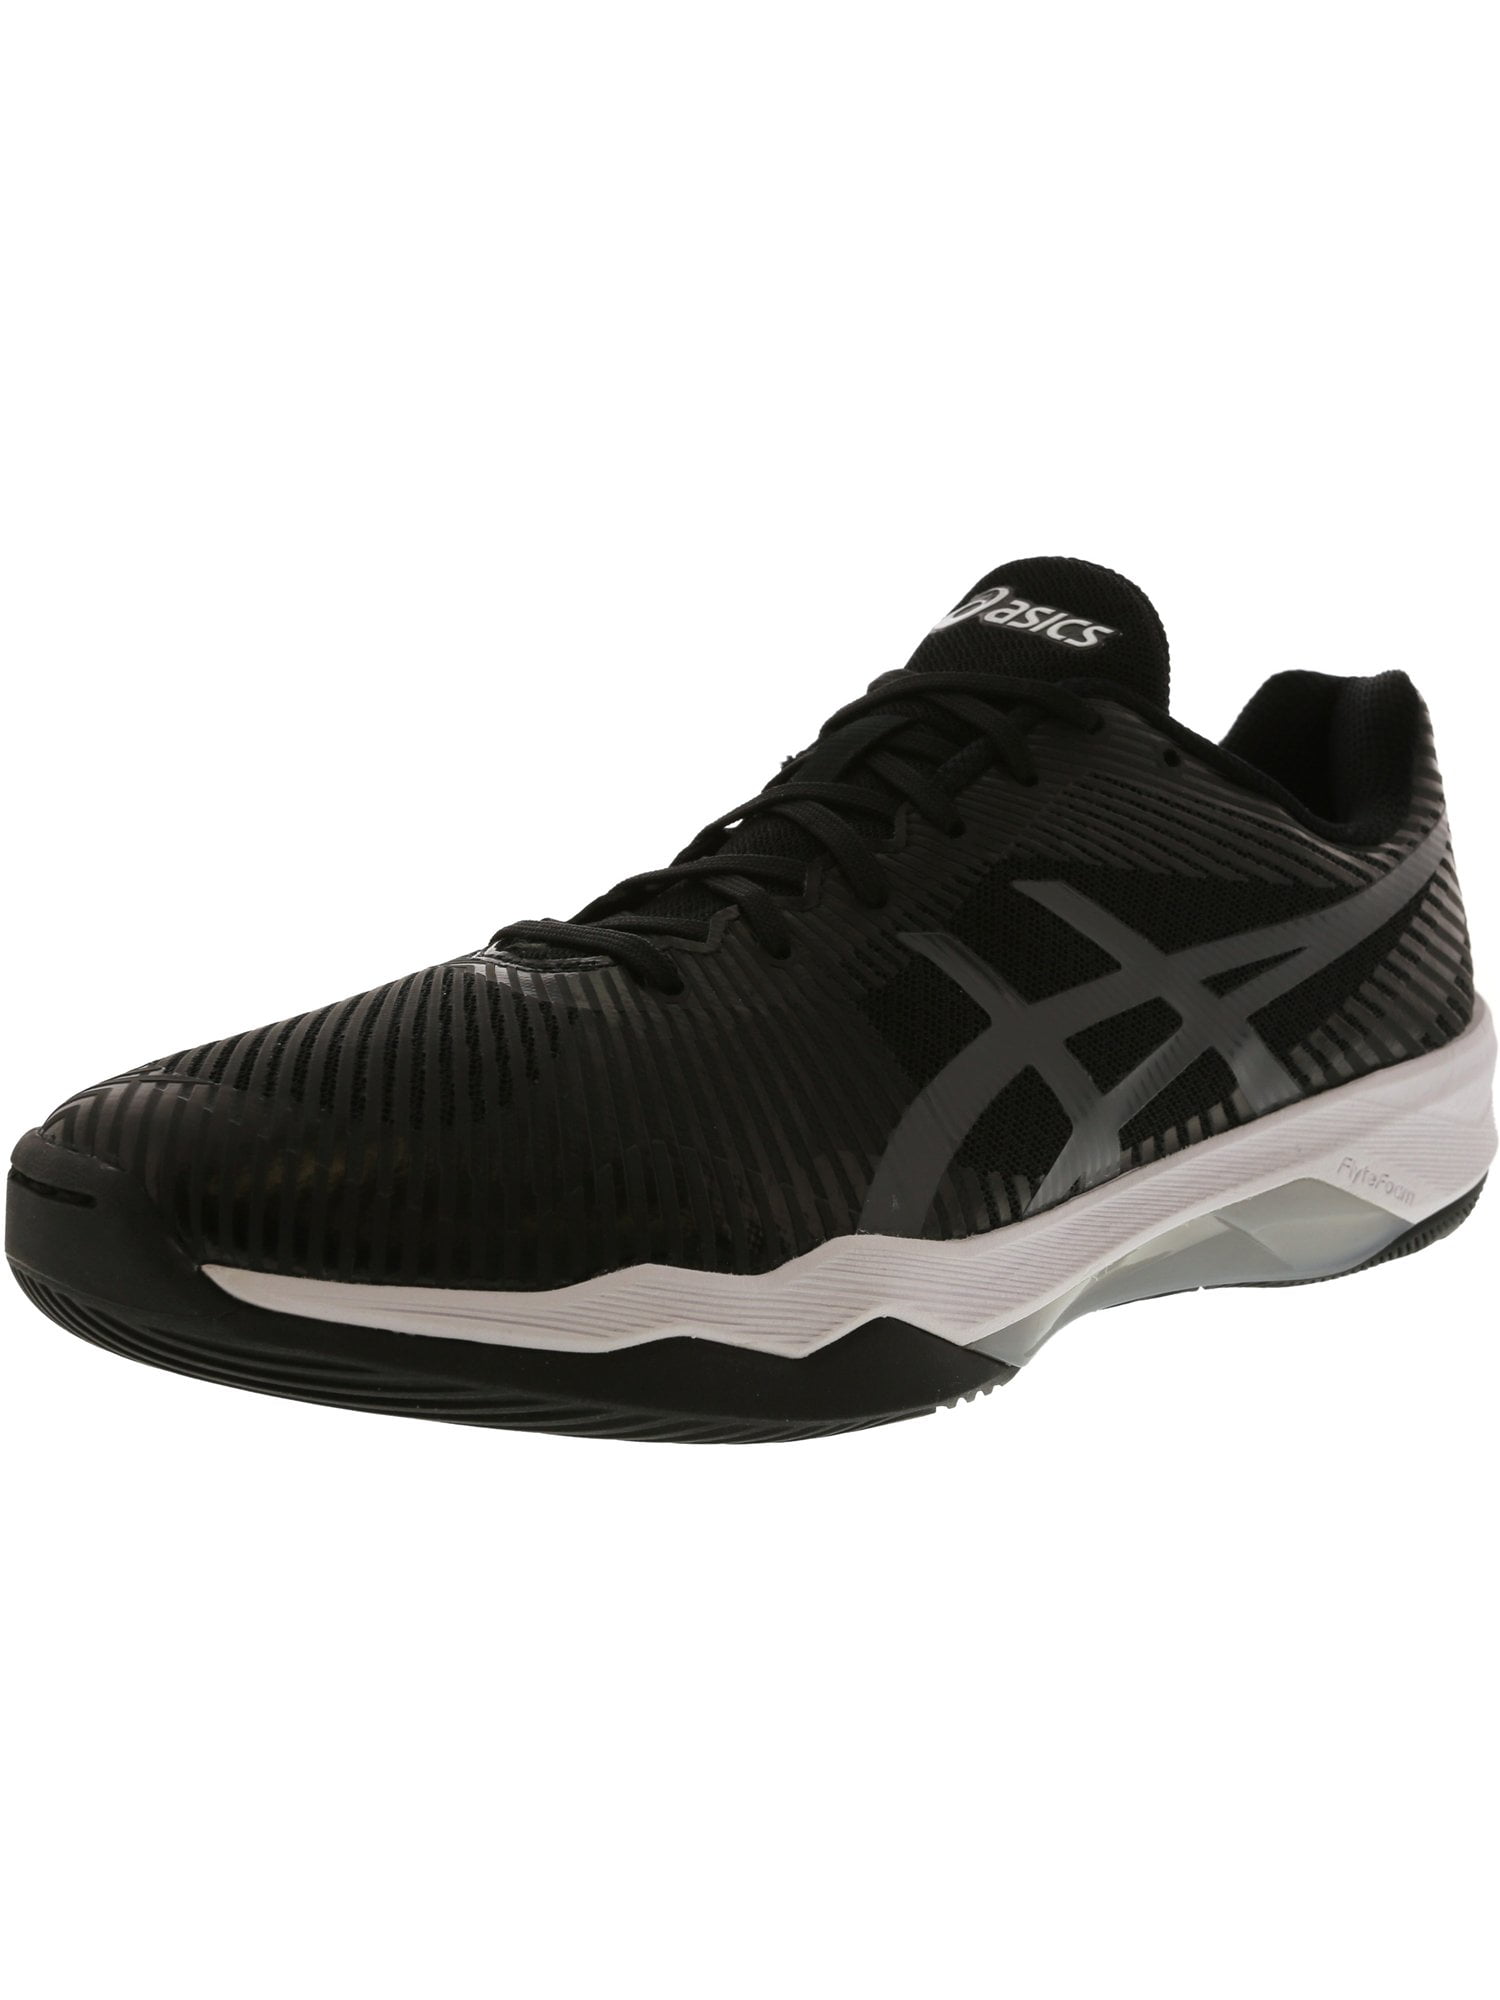 asics black and white volleyball shoes